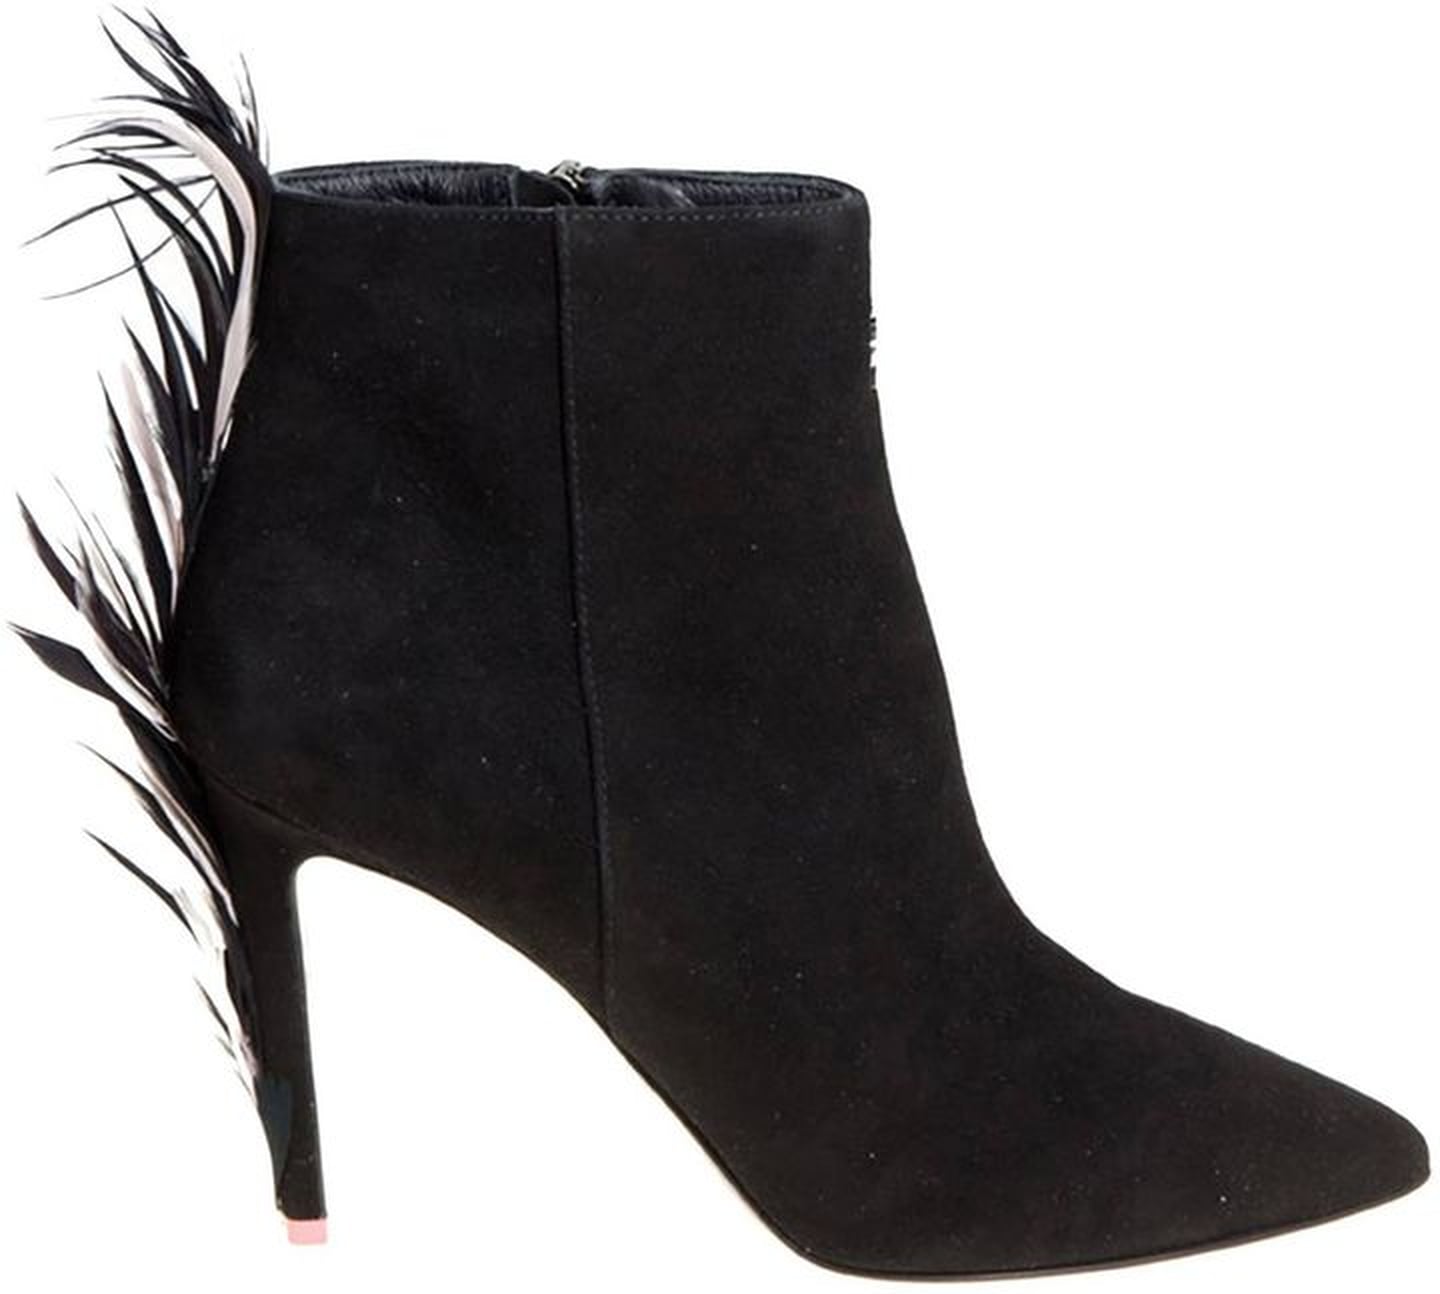 Gifts For the Girl Who Loves Boots | POPSUGAR Fashion